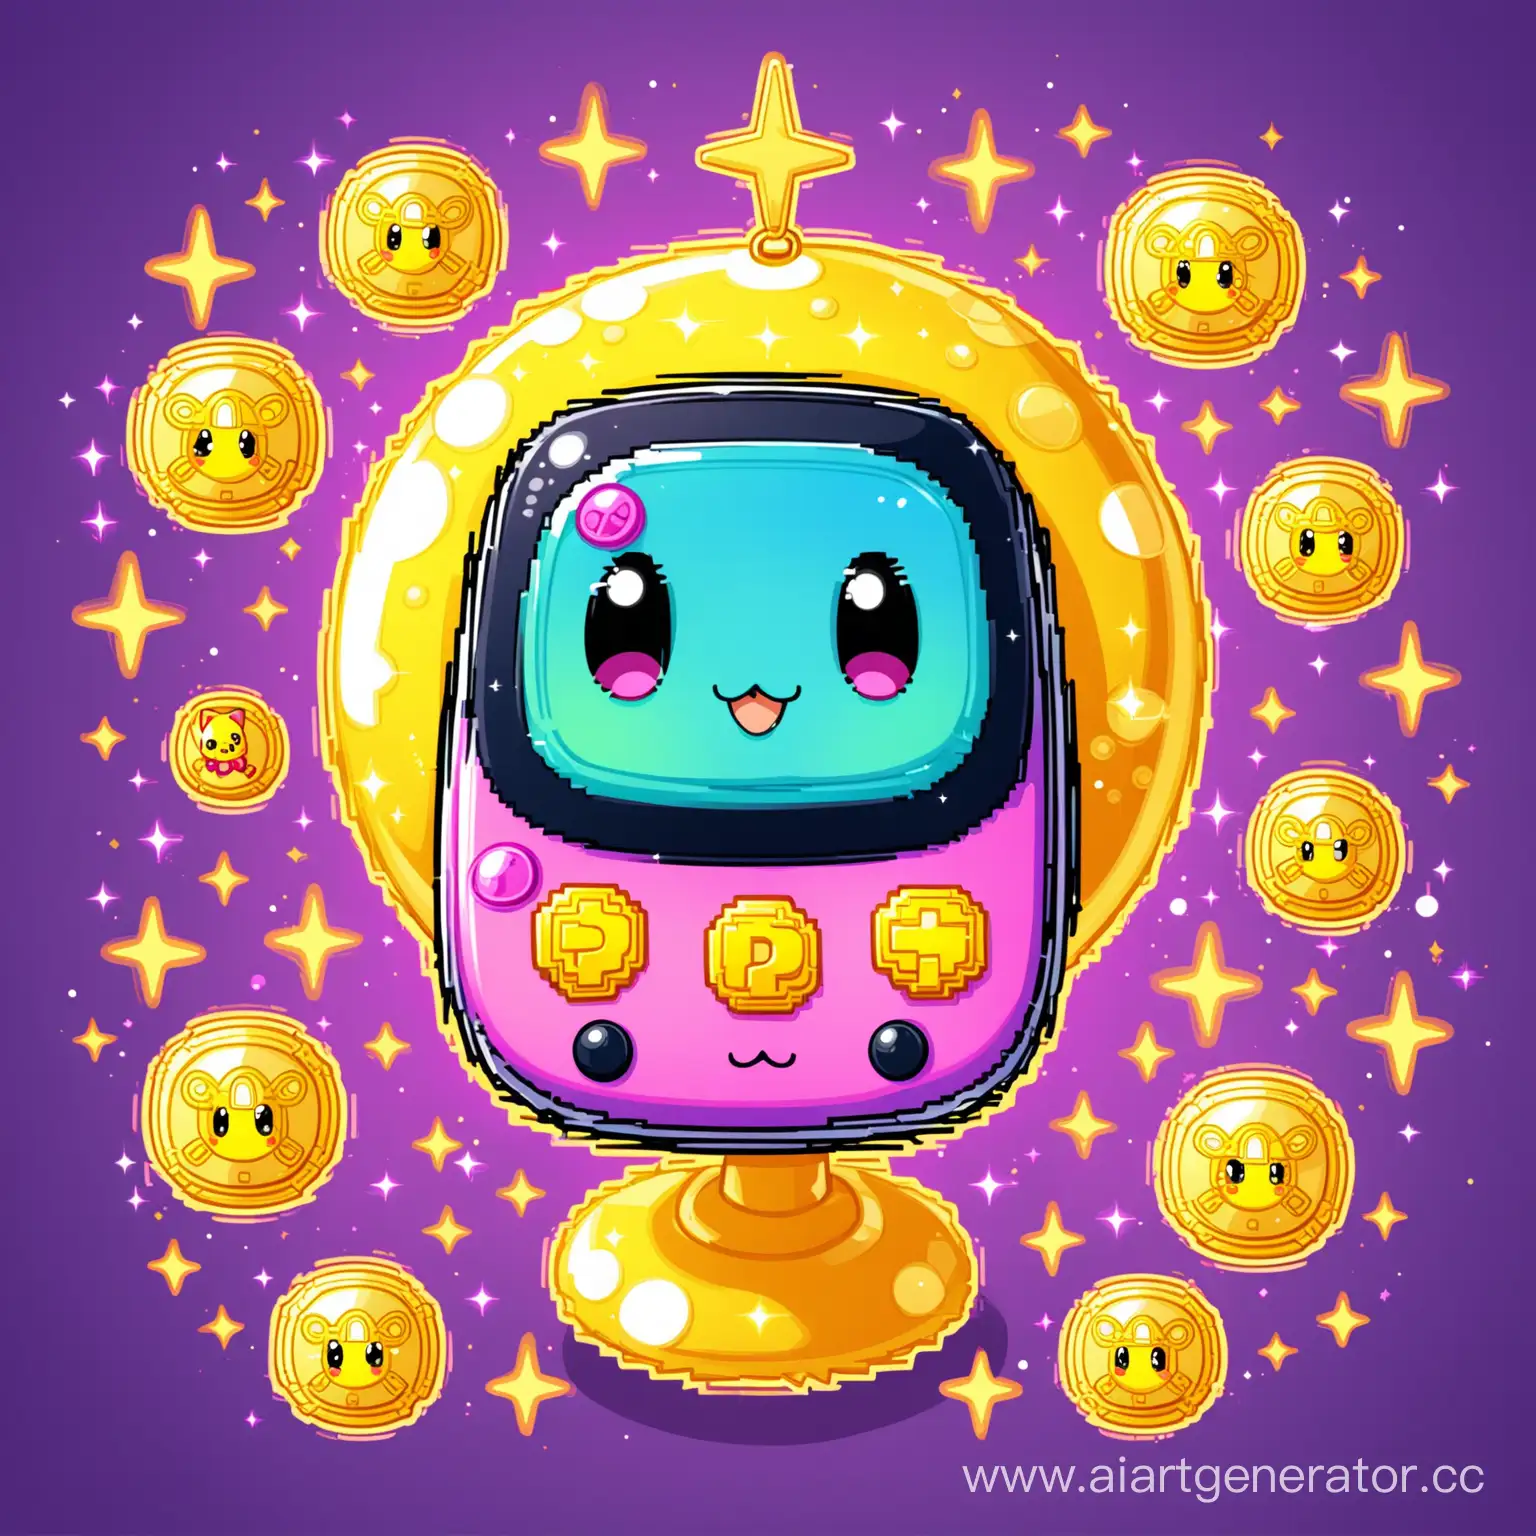 Anime-Tamagotchi-Pet-with-Cryptocurrency-Theme